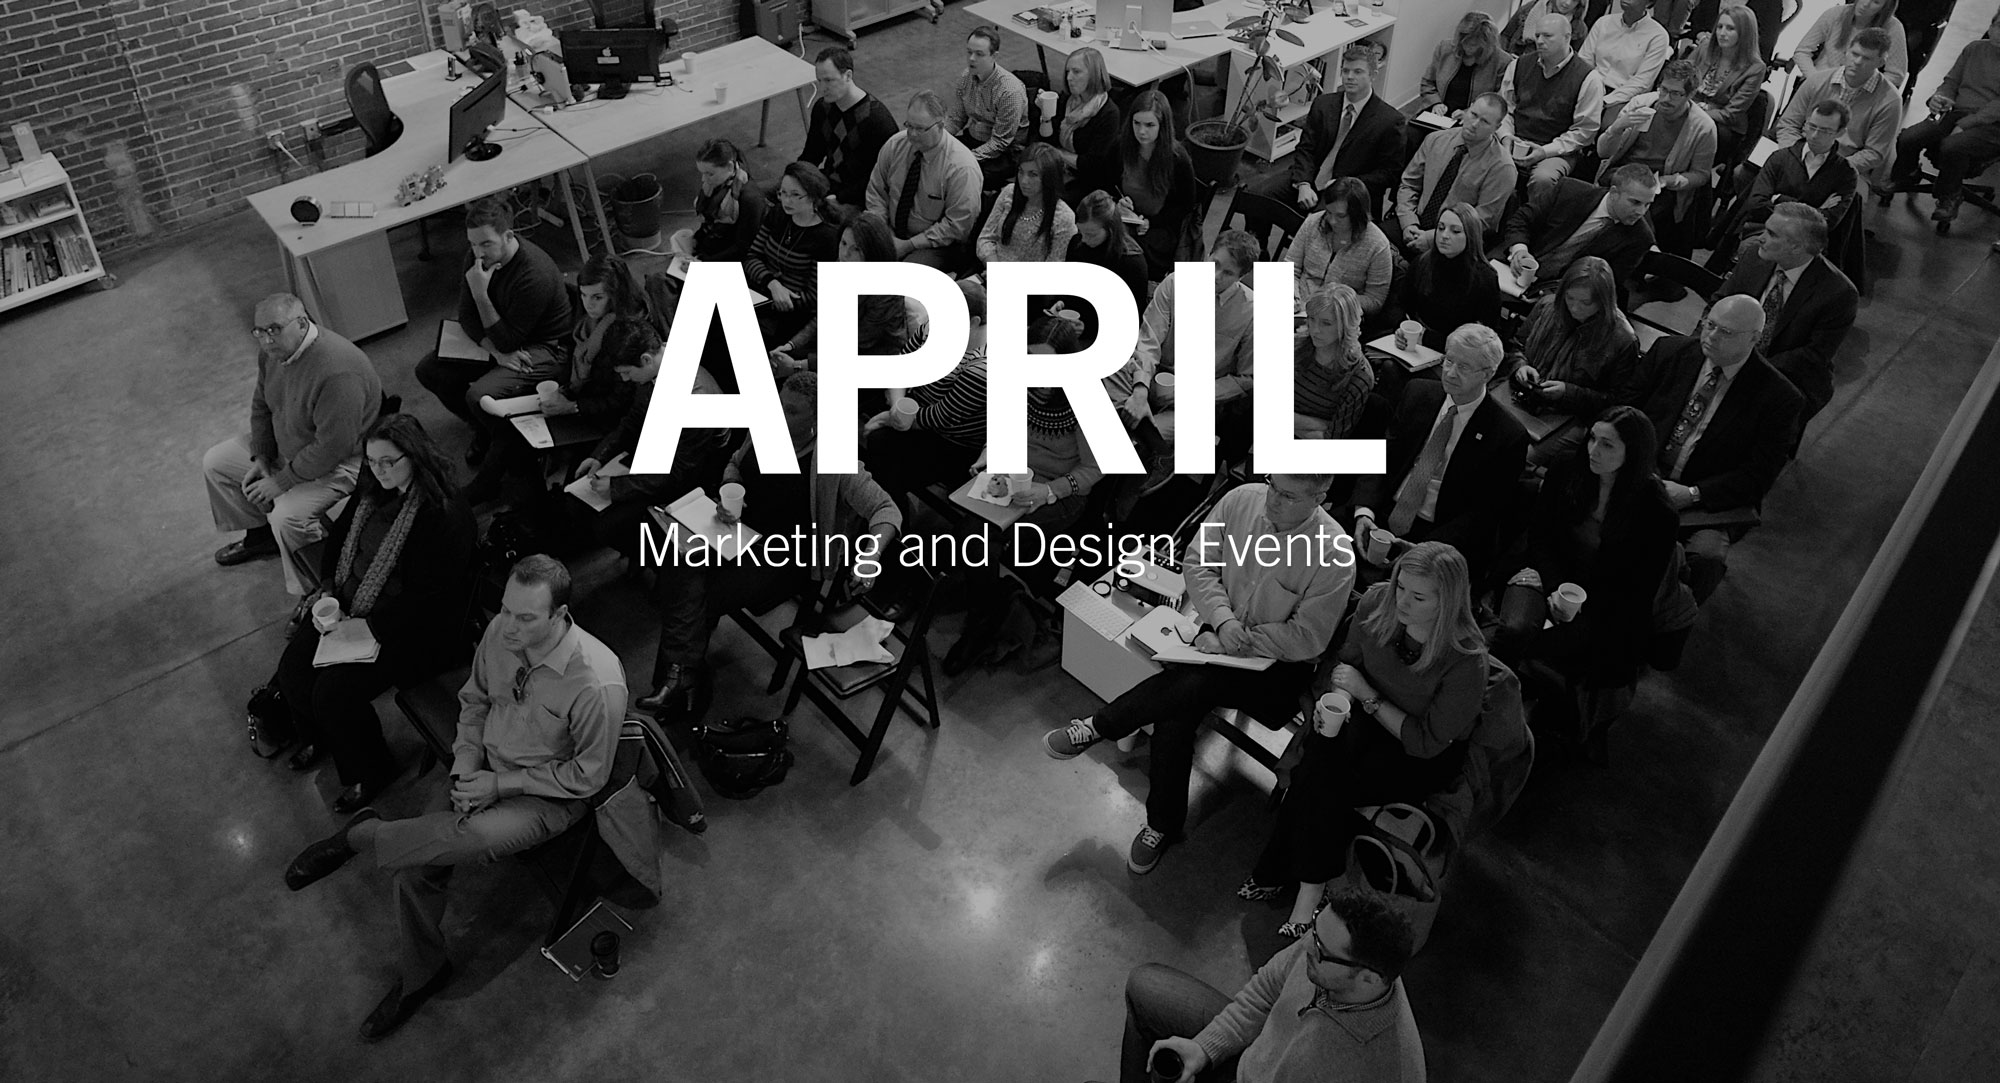 April 2014 Marketing and Design Events in St. Louis